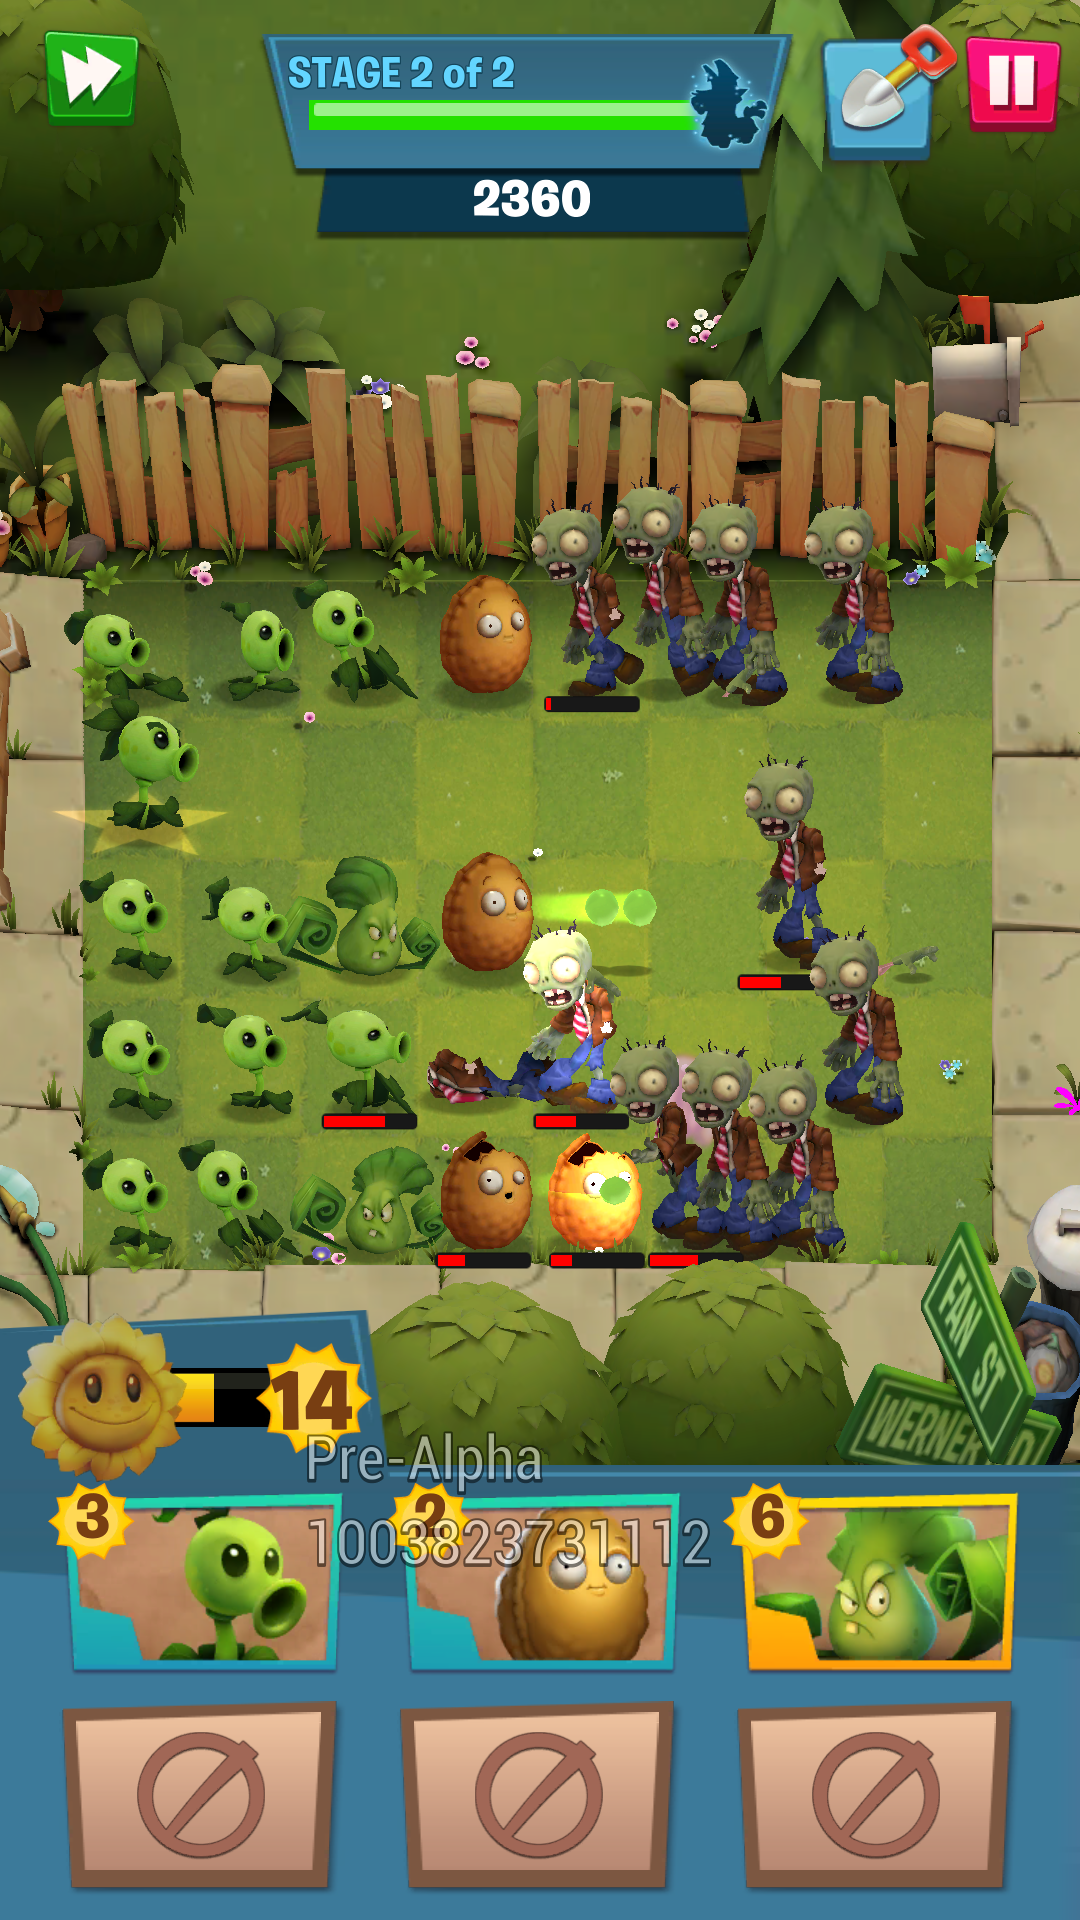 Plants Vs. Zombies 3' From PopCap Games and EA Is Real and Currently  Available In Closed Alpha for Android – TouchArcade